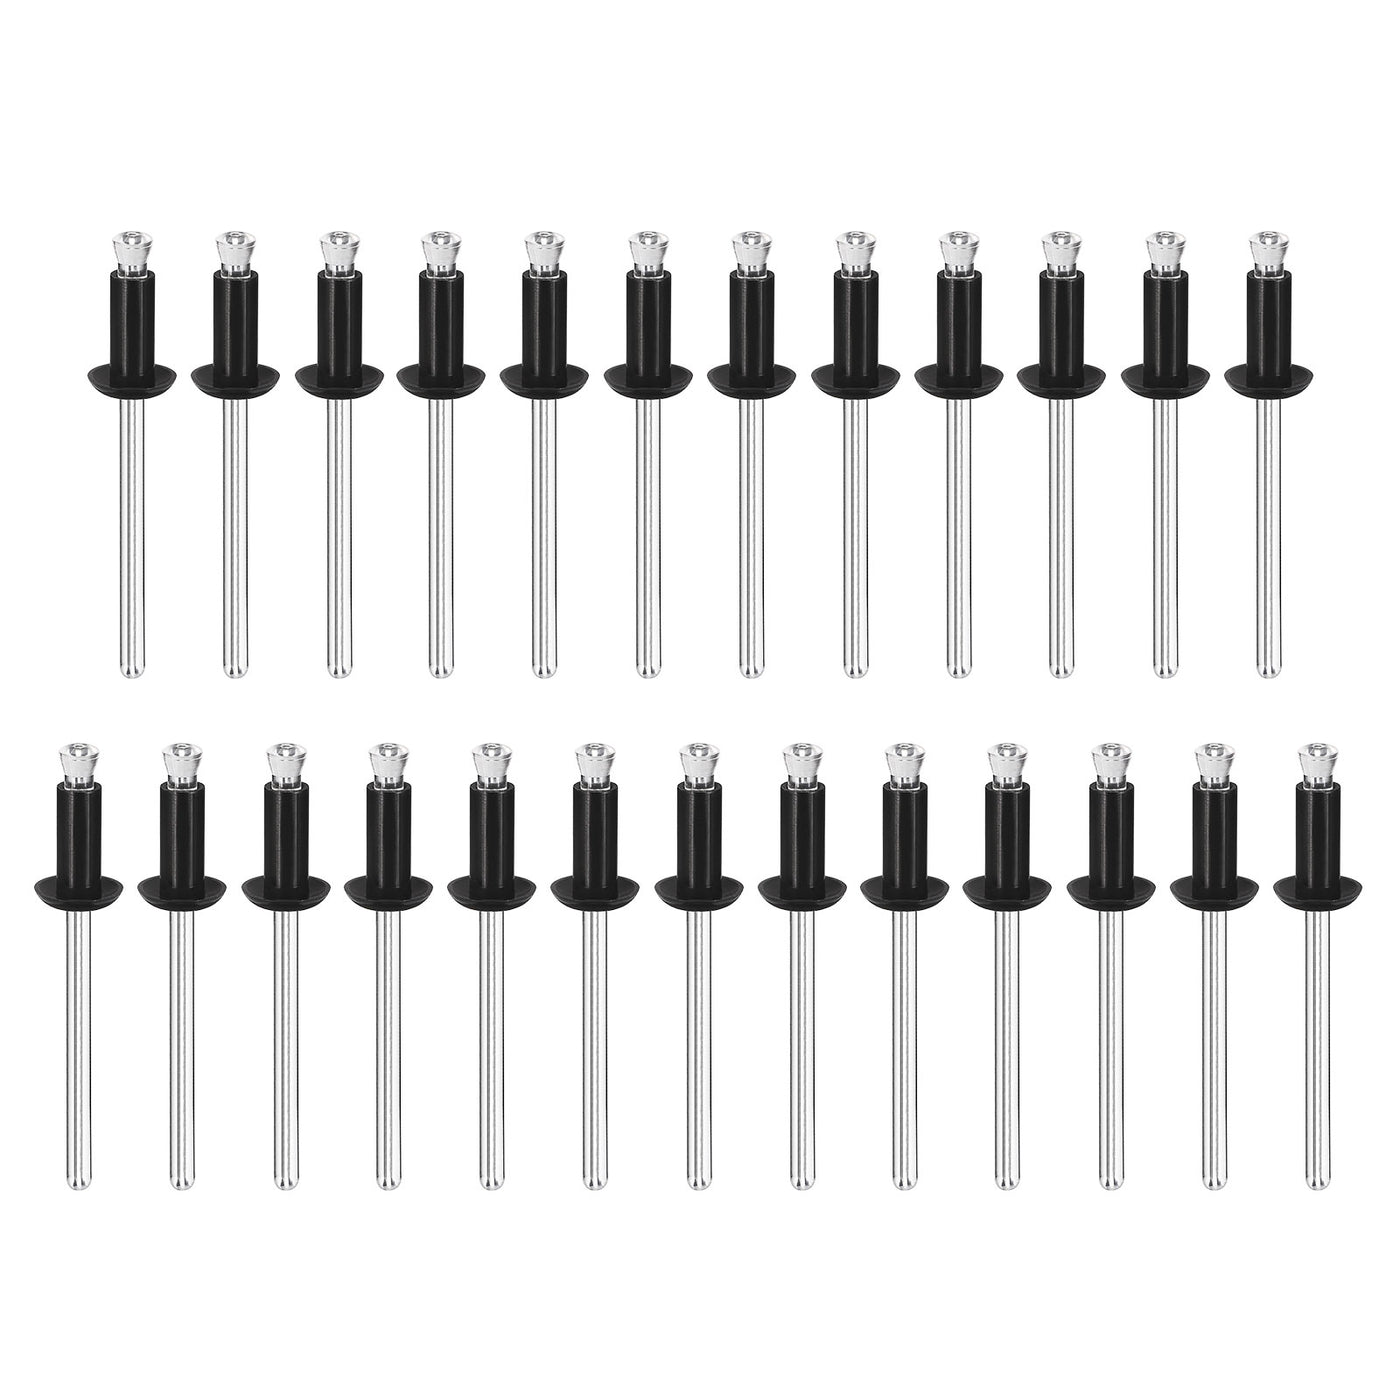 uxcell Uxcell 4.8mm x 11.2mm Nylon Blind Rivets for PC Board Bumper Trim Retainer, Black 25Pcs